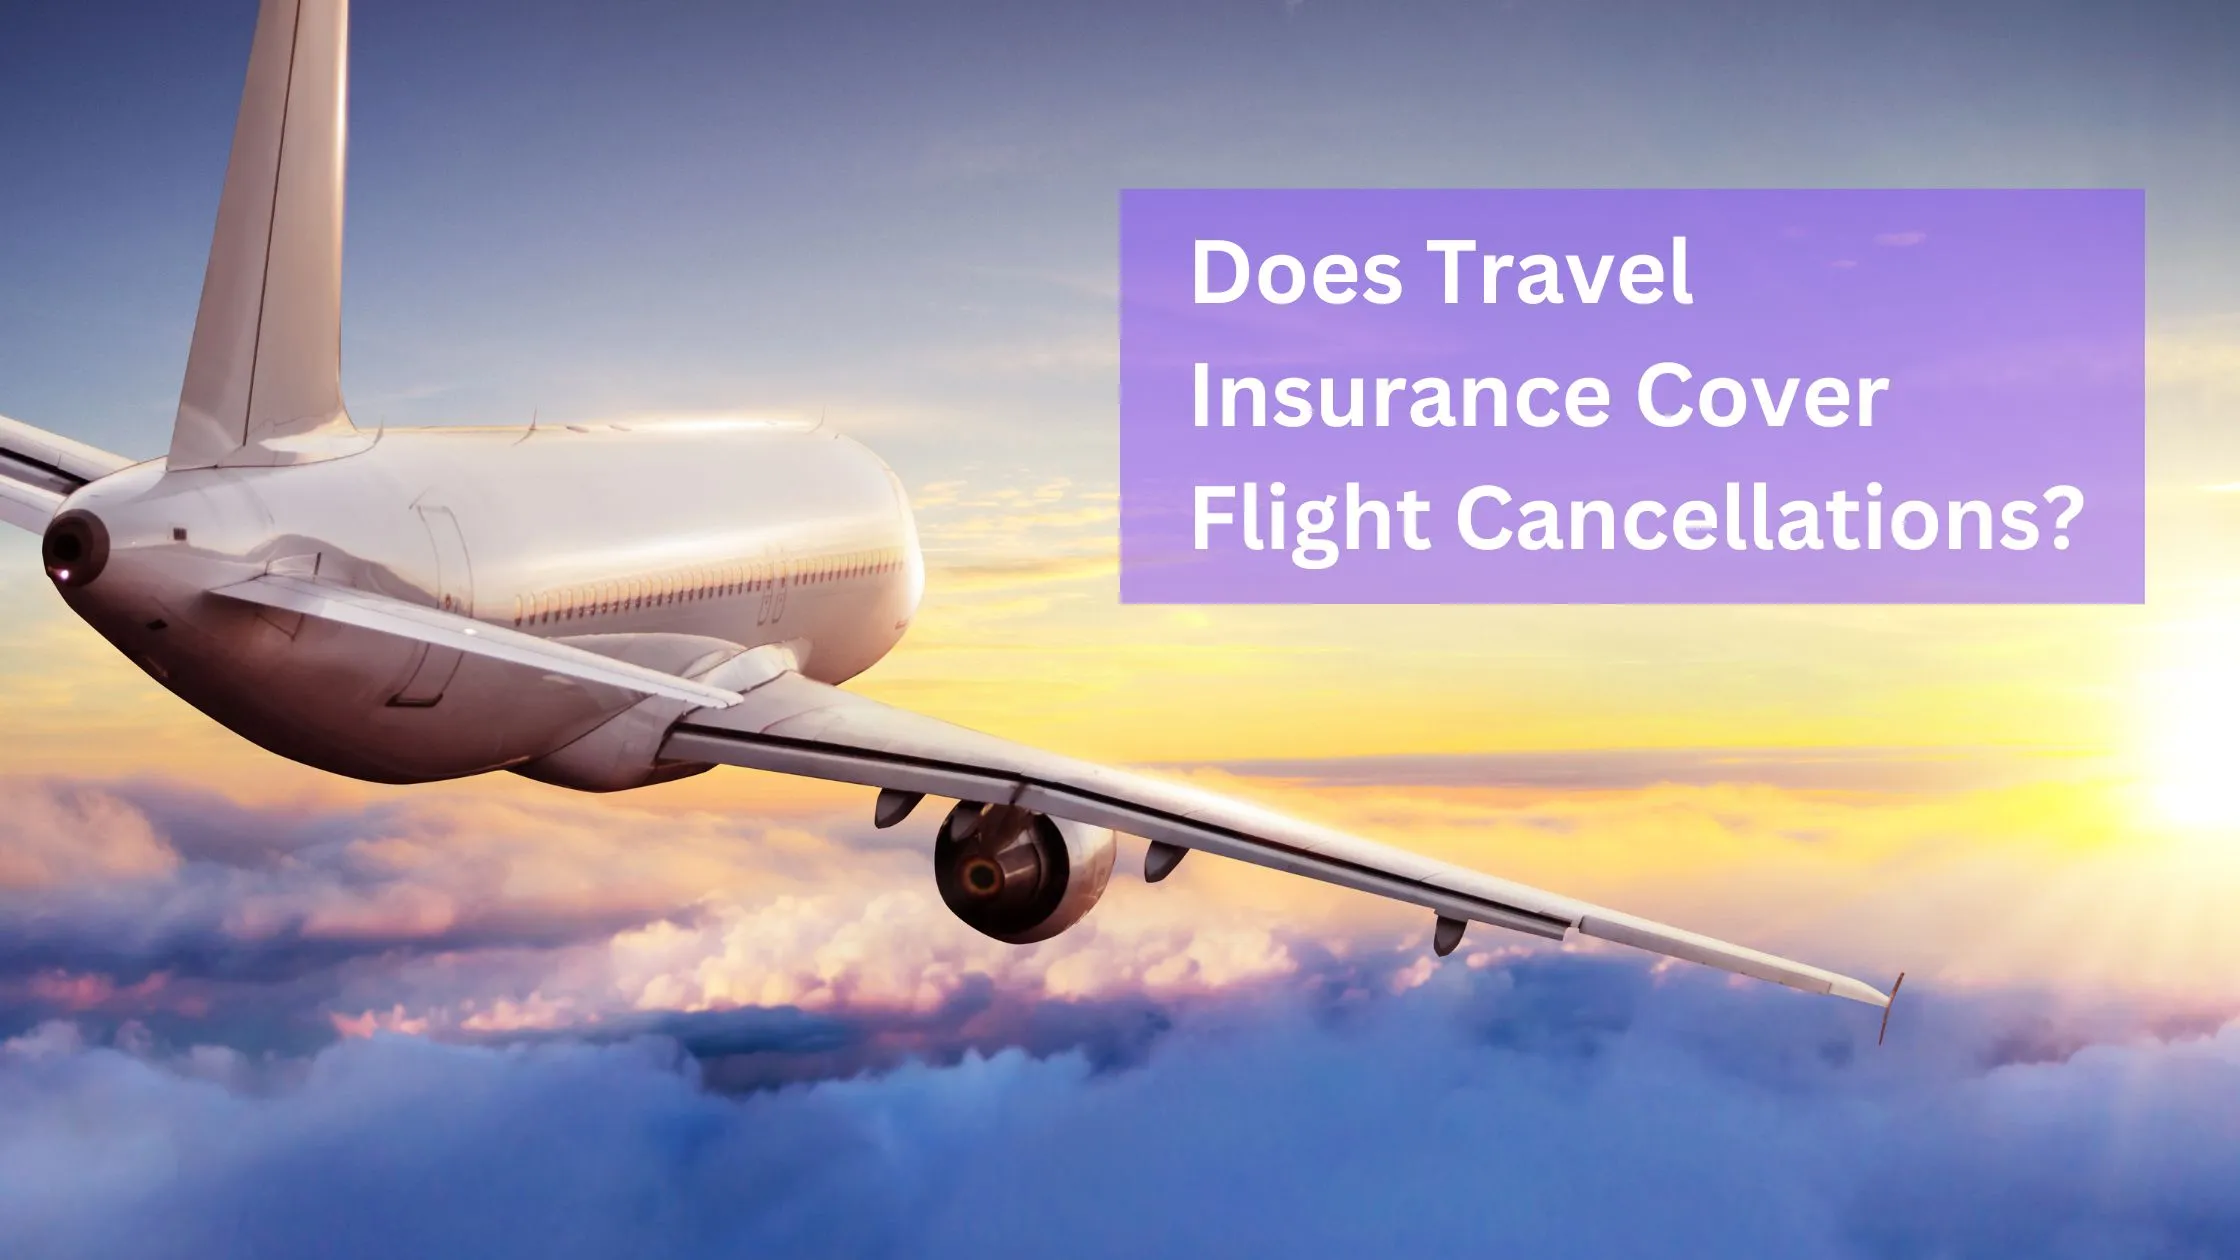 Does Travel Insurance Cover Flight Cancellations